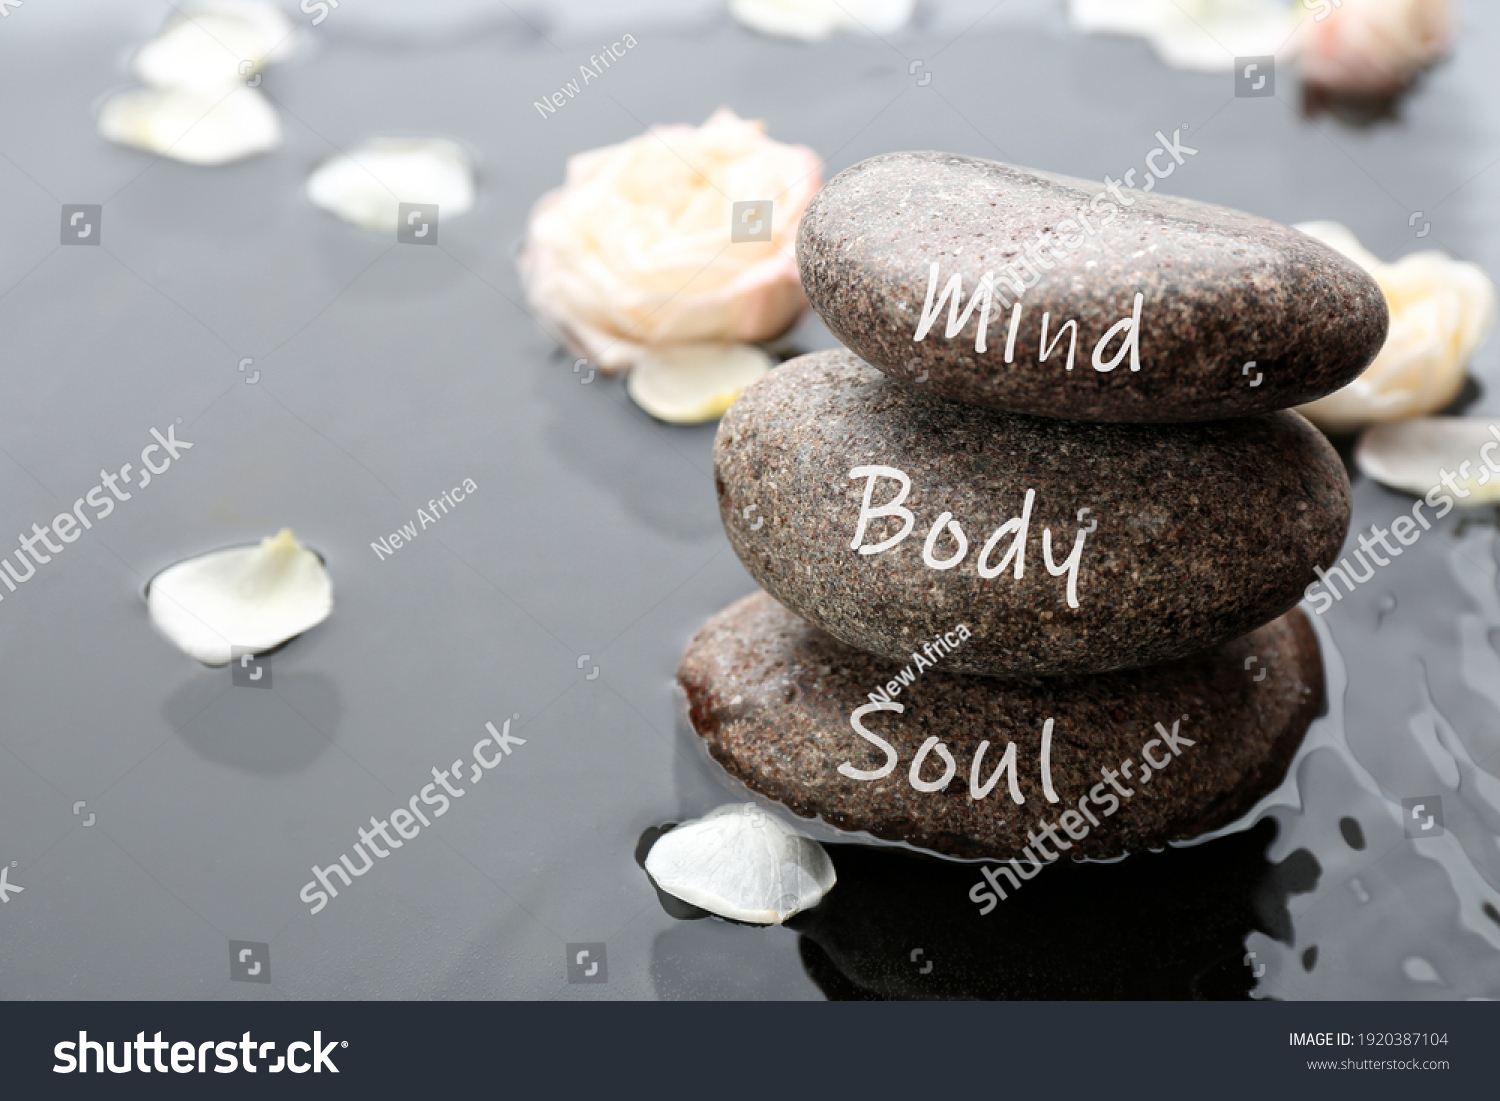 Stones with words Mind, Body, Soul and flower petals in water, space for text. Zen lifestyle #1920387104